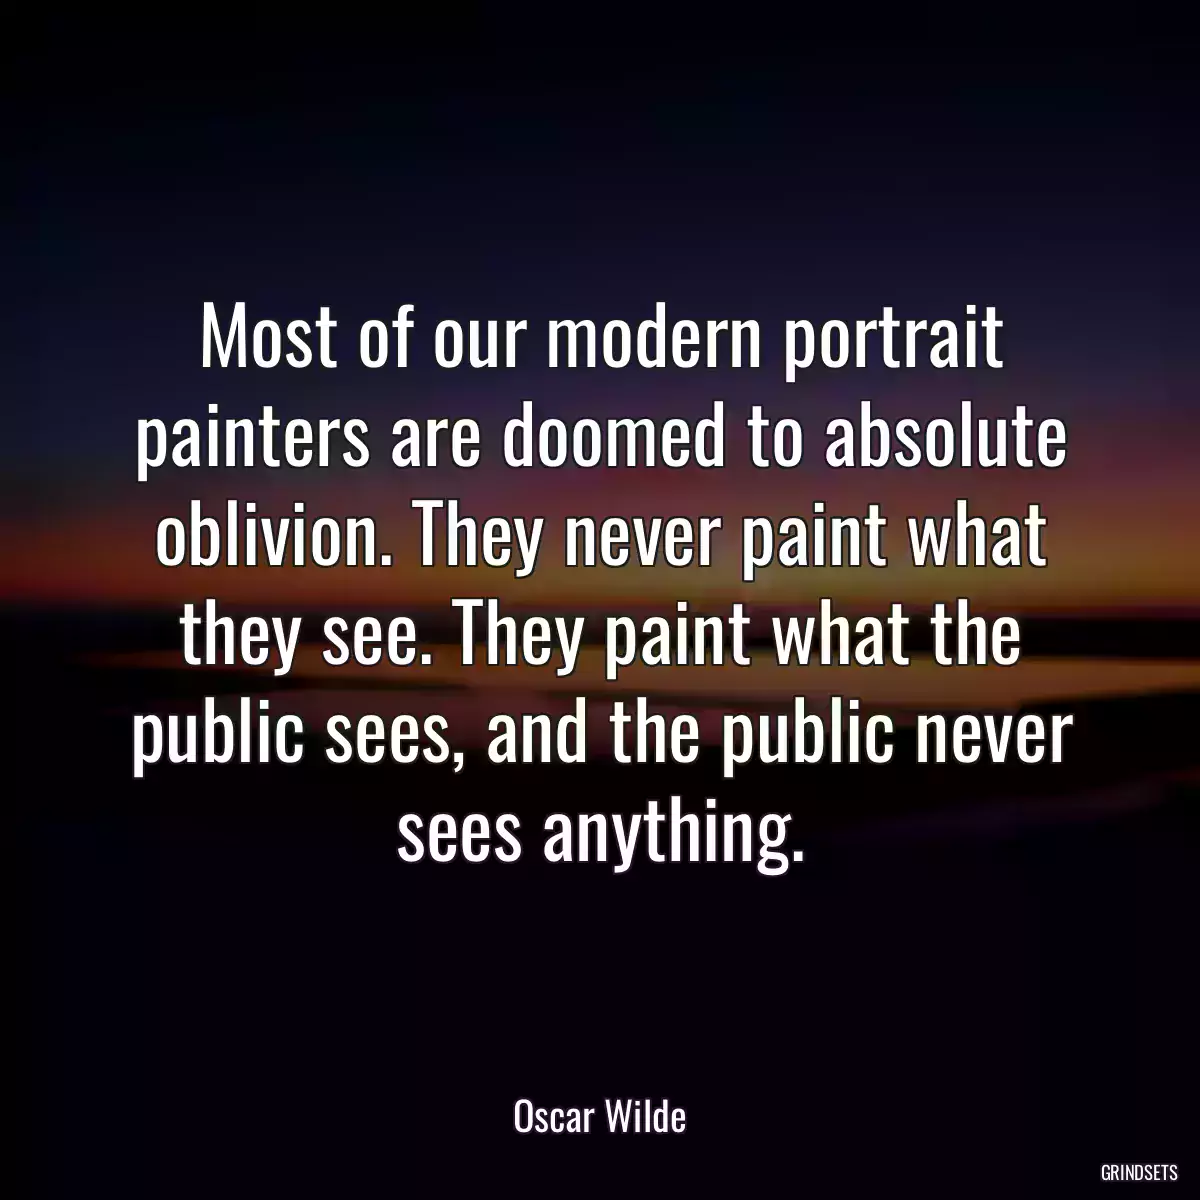 Most of our modern portrait painters are doomed to absolute oblivion. They never paint what they see. They paint what the public sees, and the public never sees anything.